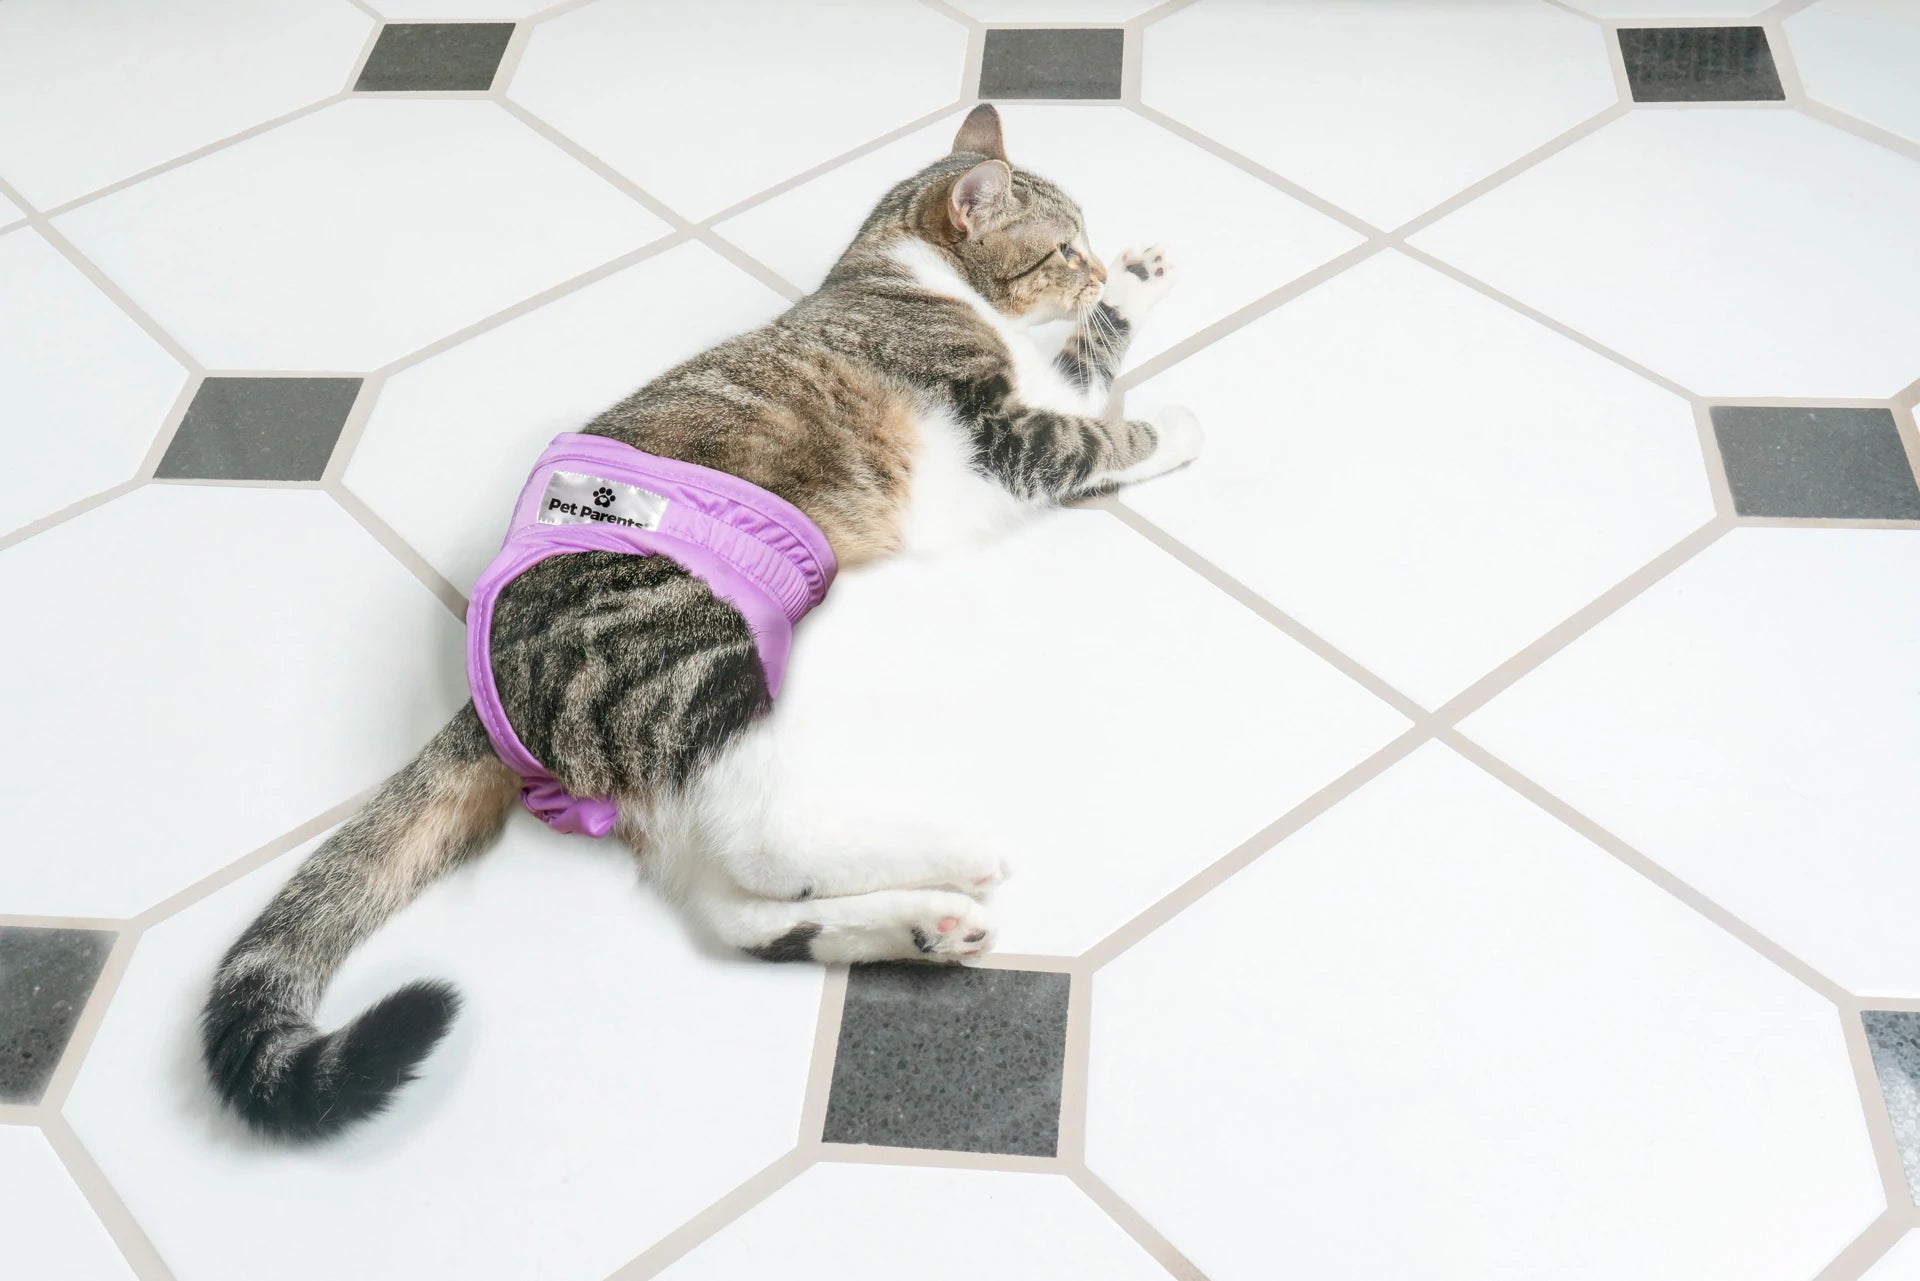 pampers cat, Can cats wear diapers? How often to change cat diaper